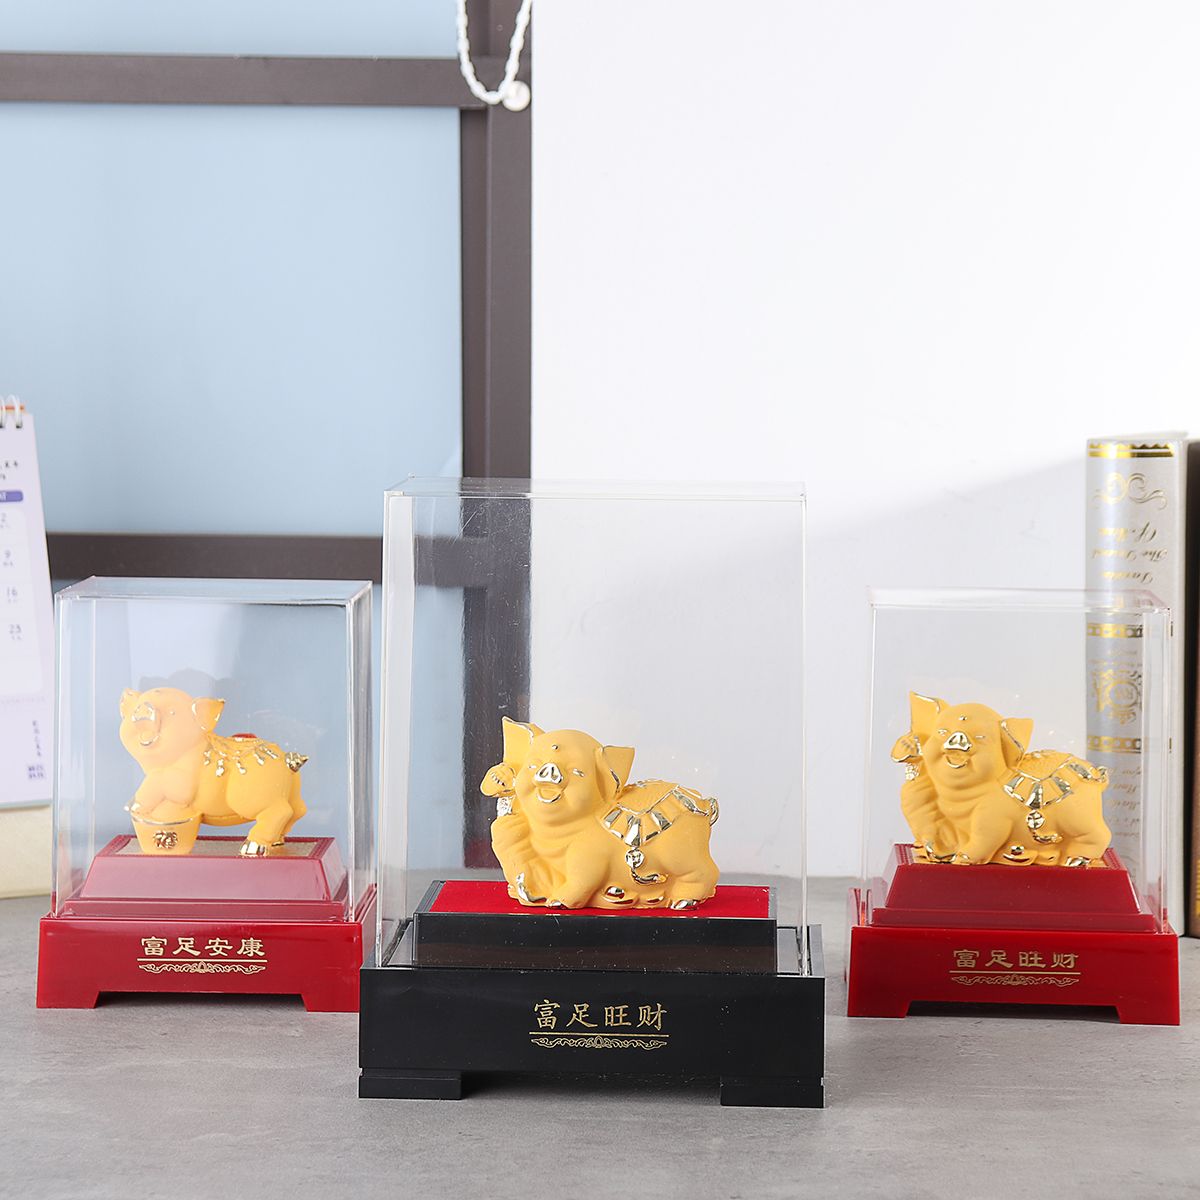 2019-Chinese-Zodiac-Gold-Pig-Money-Wealth-Statue-Office-Home-Decorations-Ornament-Gift-1515810